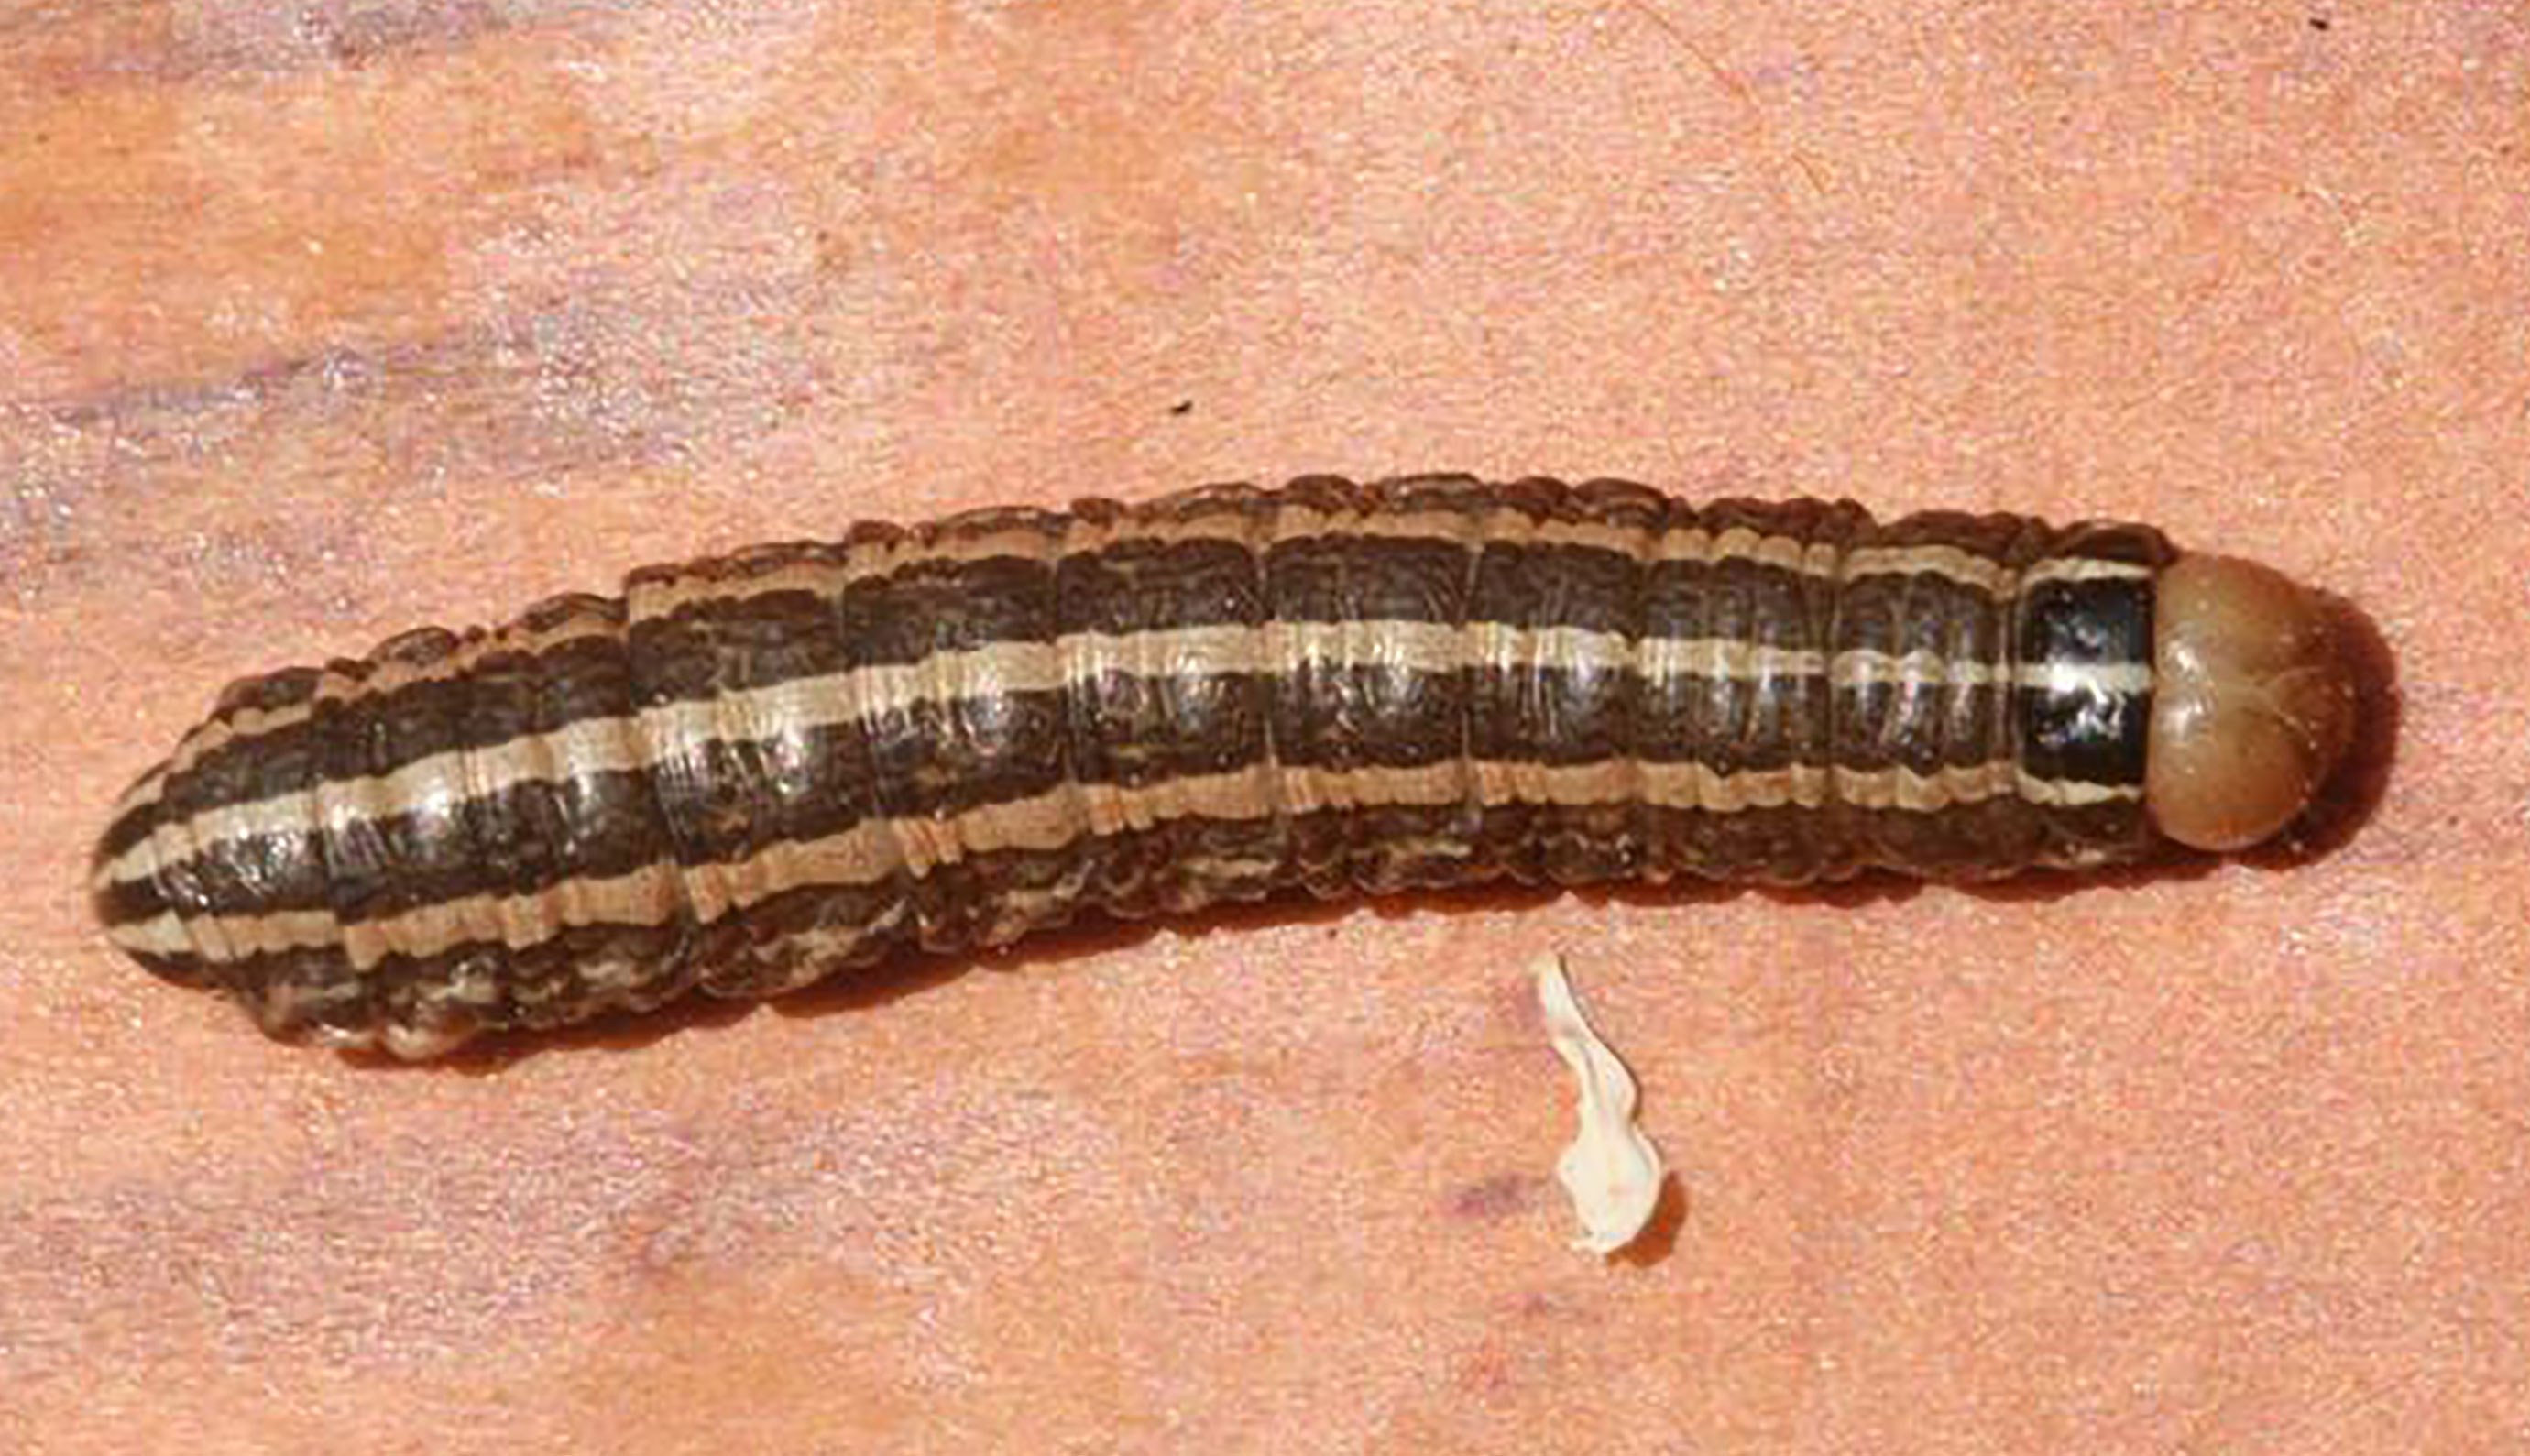 A shiny caterpillar with a light brown head, dark brown body, and three yellow stripes down the length of its back.